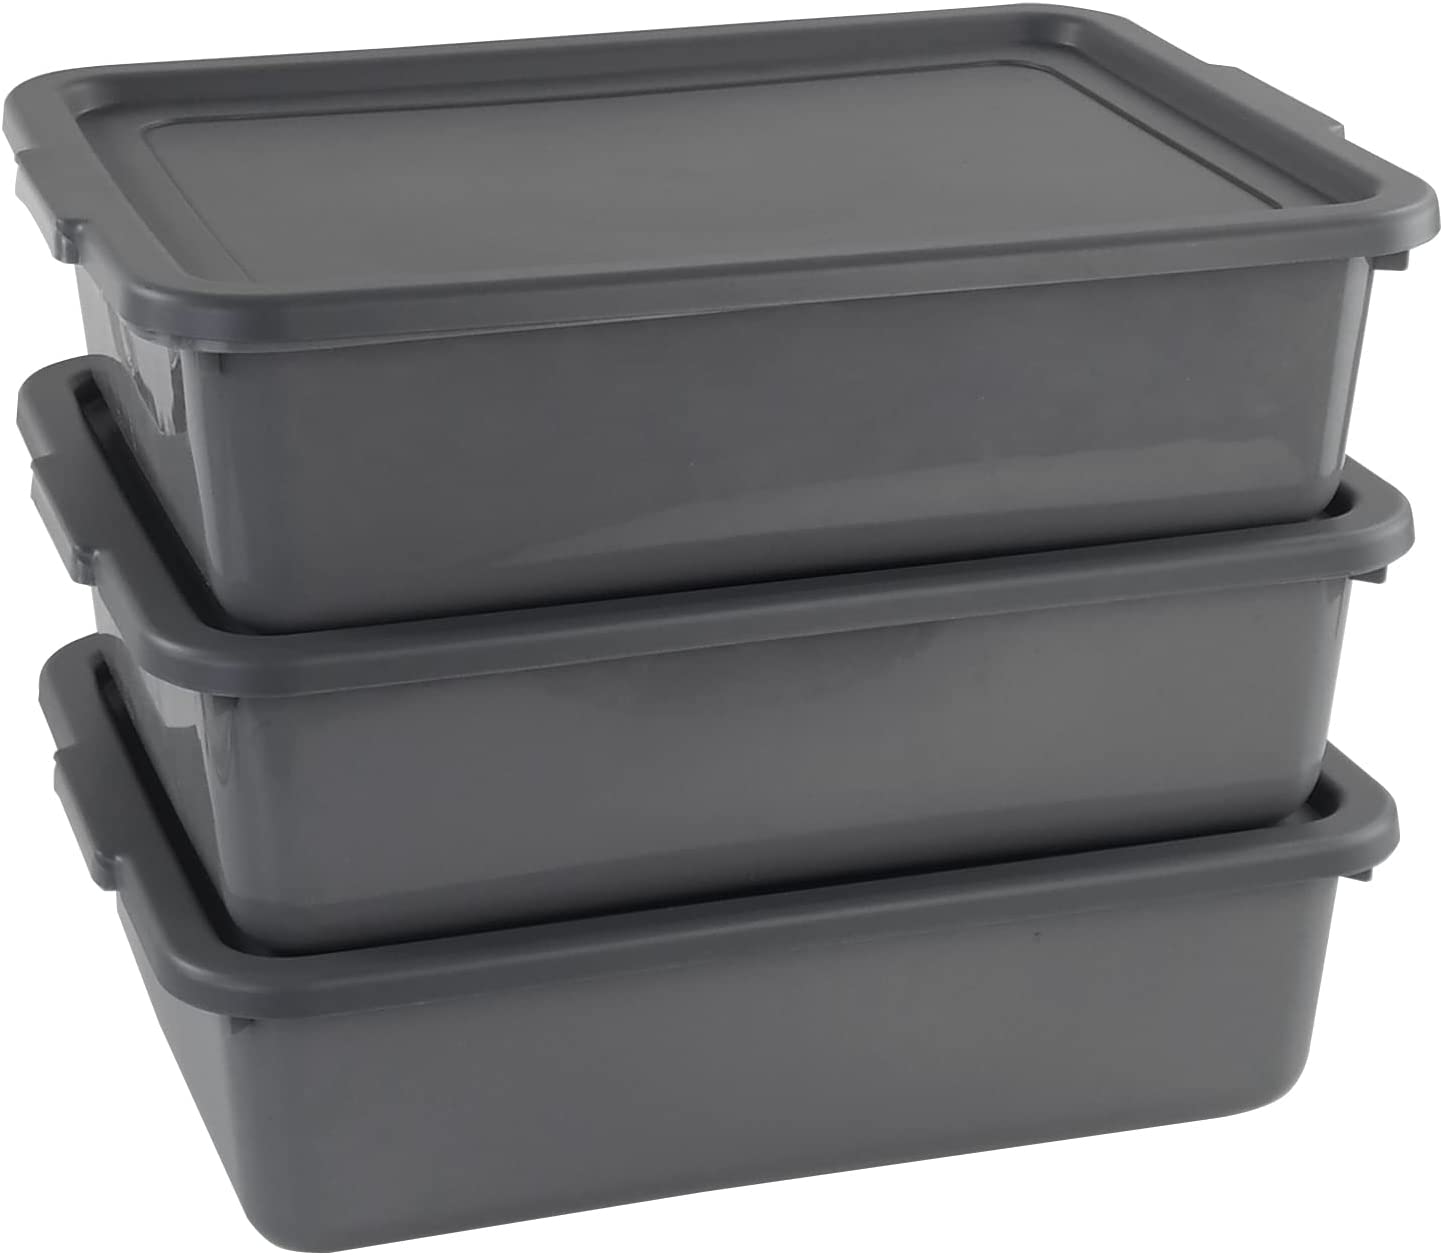 Nicesh 3-Pack 13 L Plastic Commercial Bus Tub, Gray Bus Box with Lid